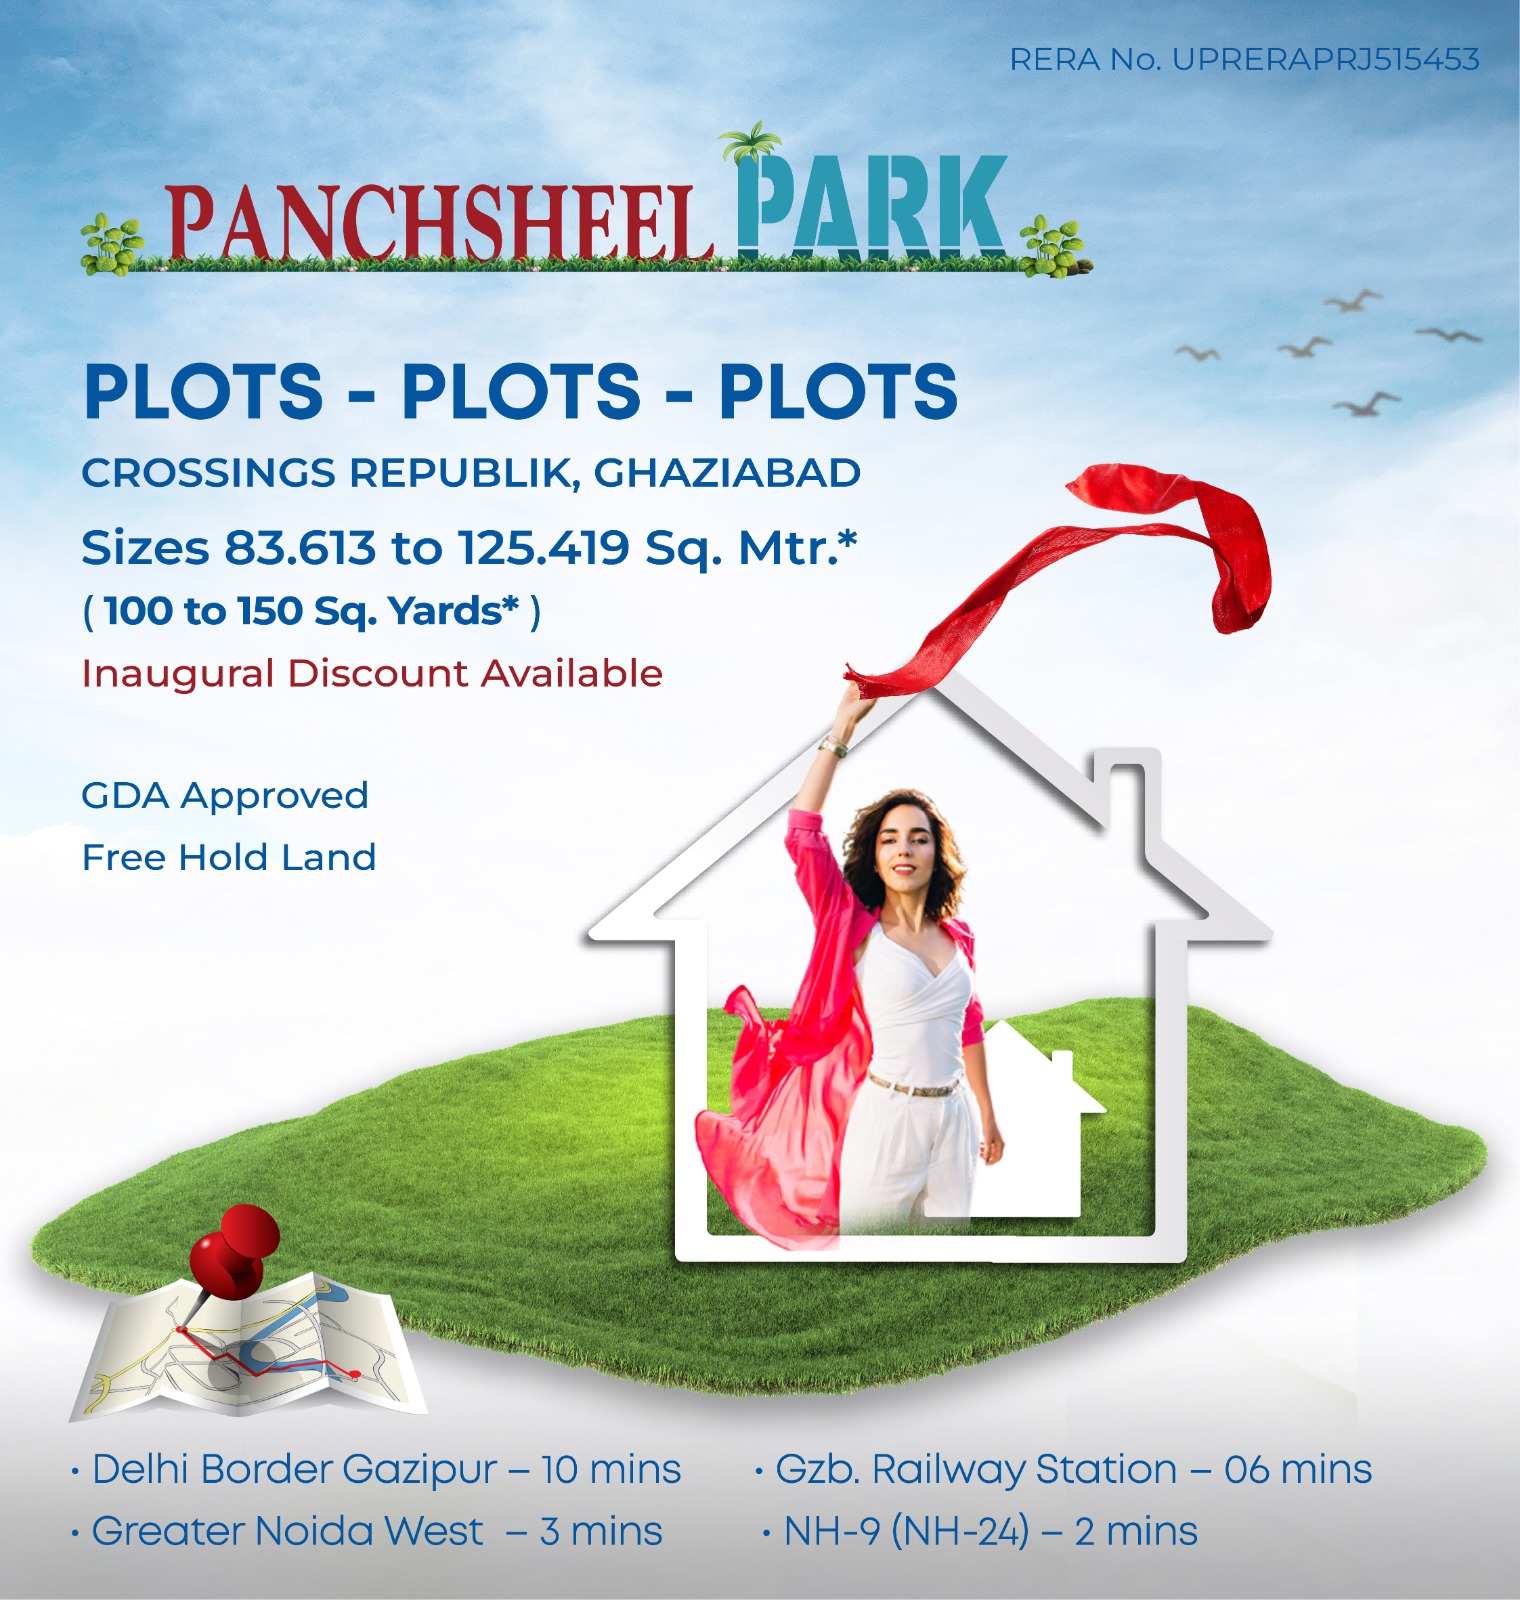 Inaugural discount available at Panchsheel Park, Ghaziabad Update